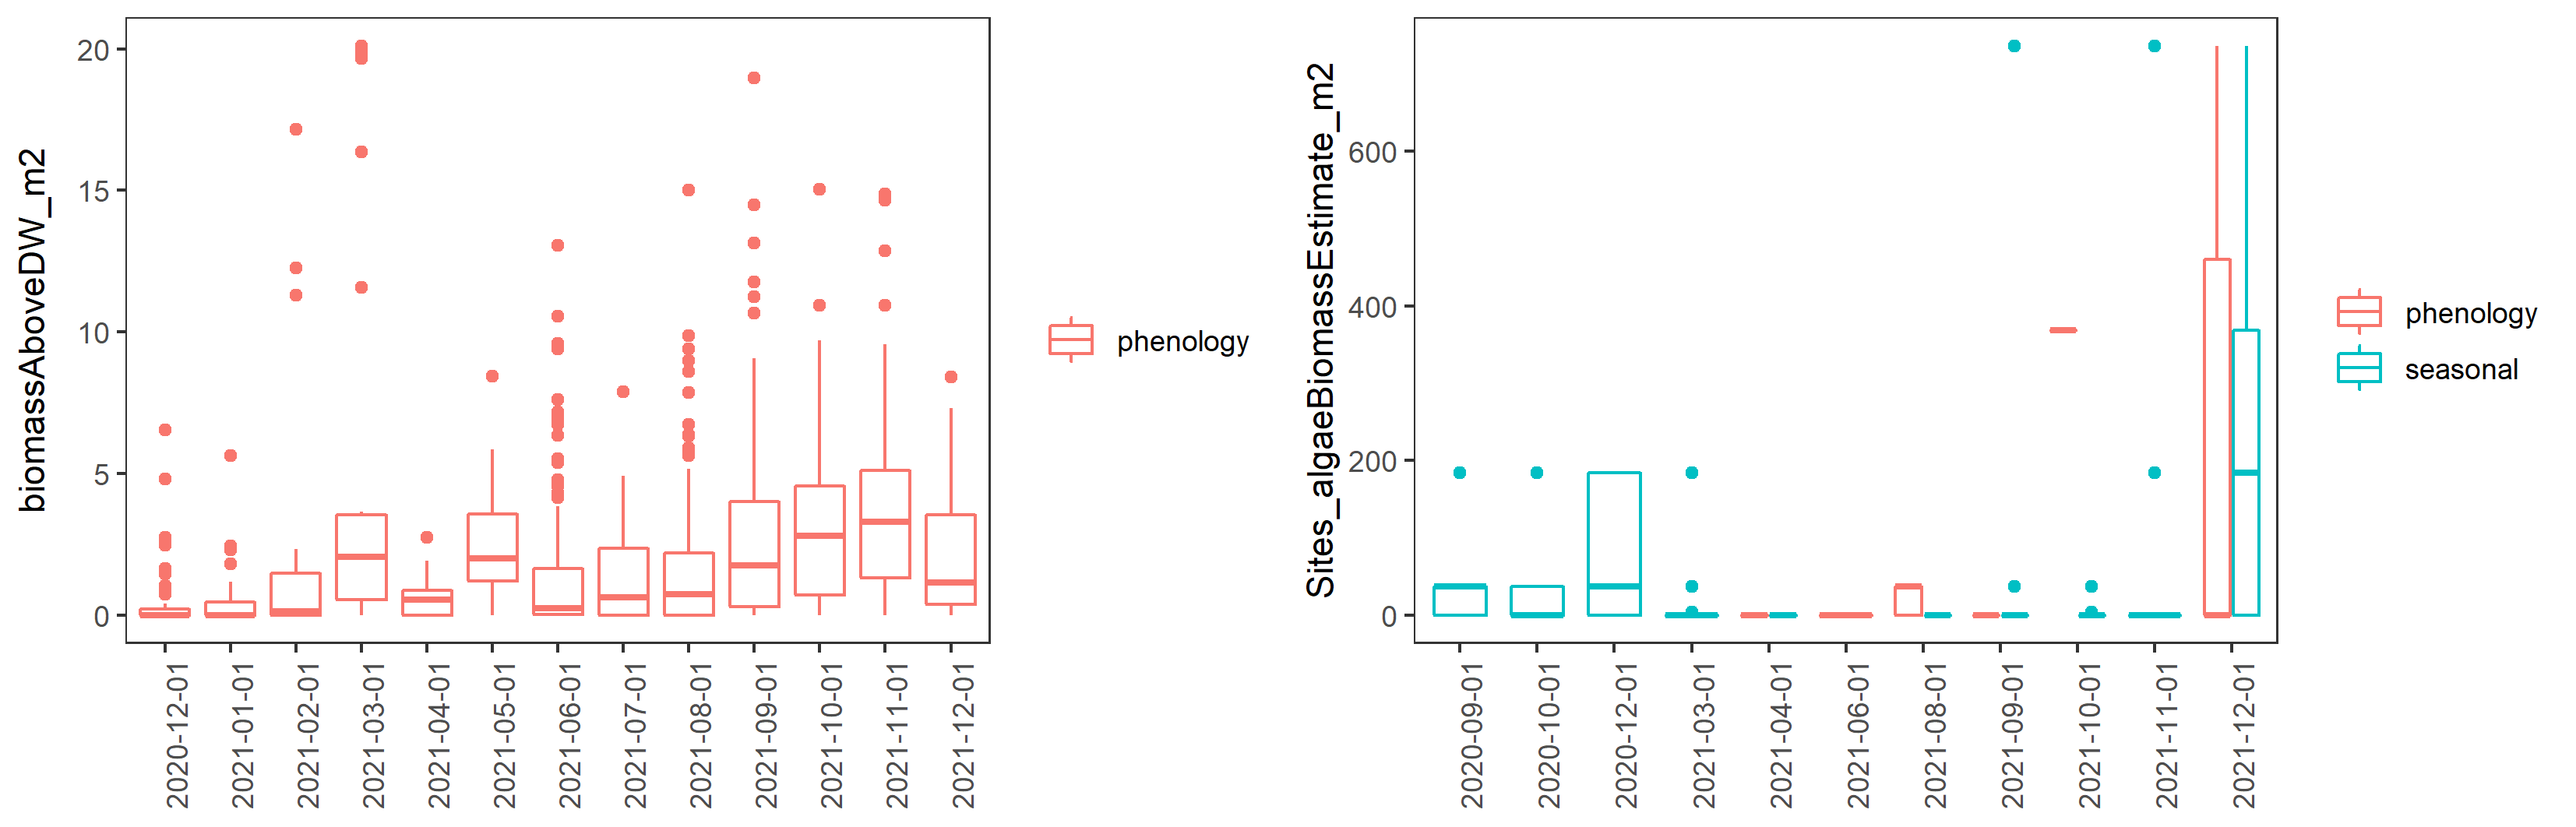 Boxplots of monthly aboveground macrophyte biomass (excluding reproductive structures, g DW/m^2^) and estimated algae biomass (g DW/m^2^) between December 2020 and December 2021.